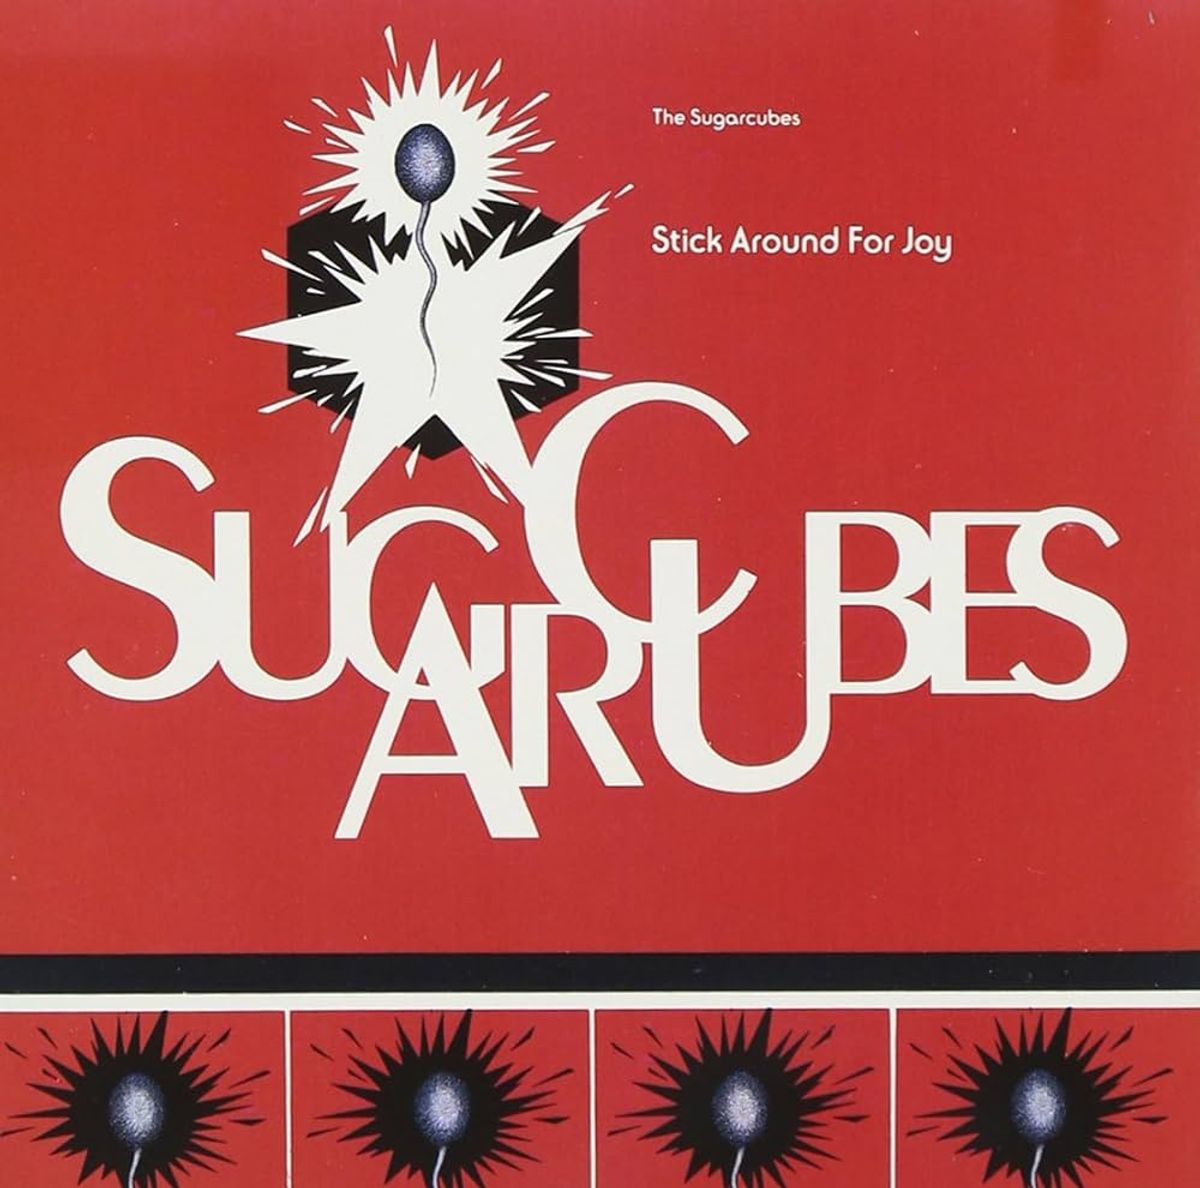 #IMJohnMcGeoch - The Sugarcubes - Gold